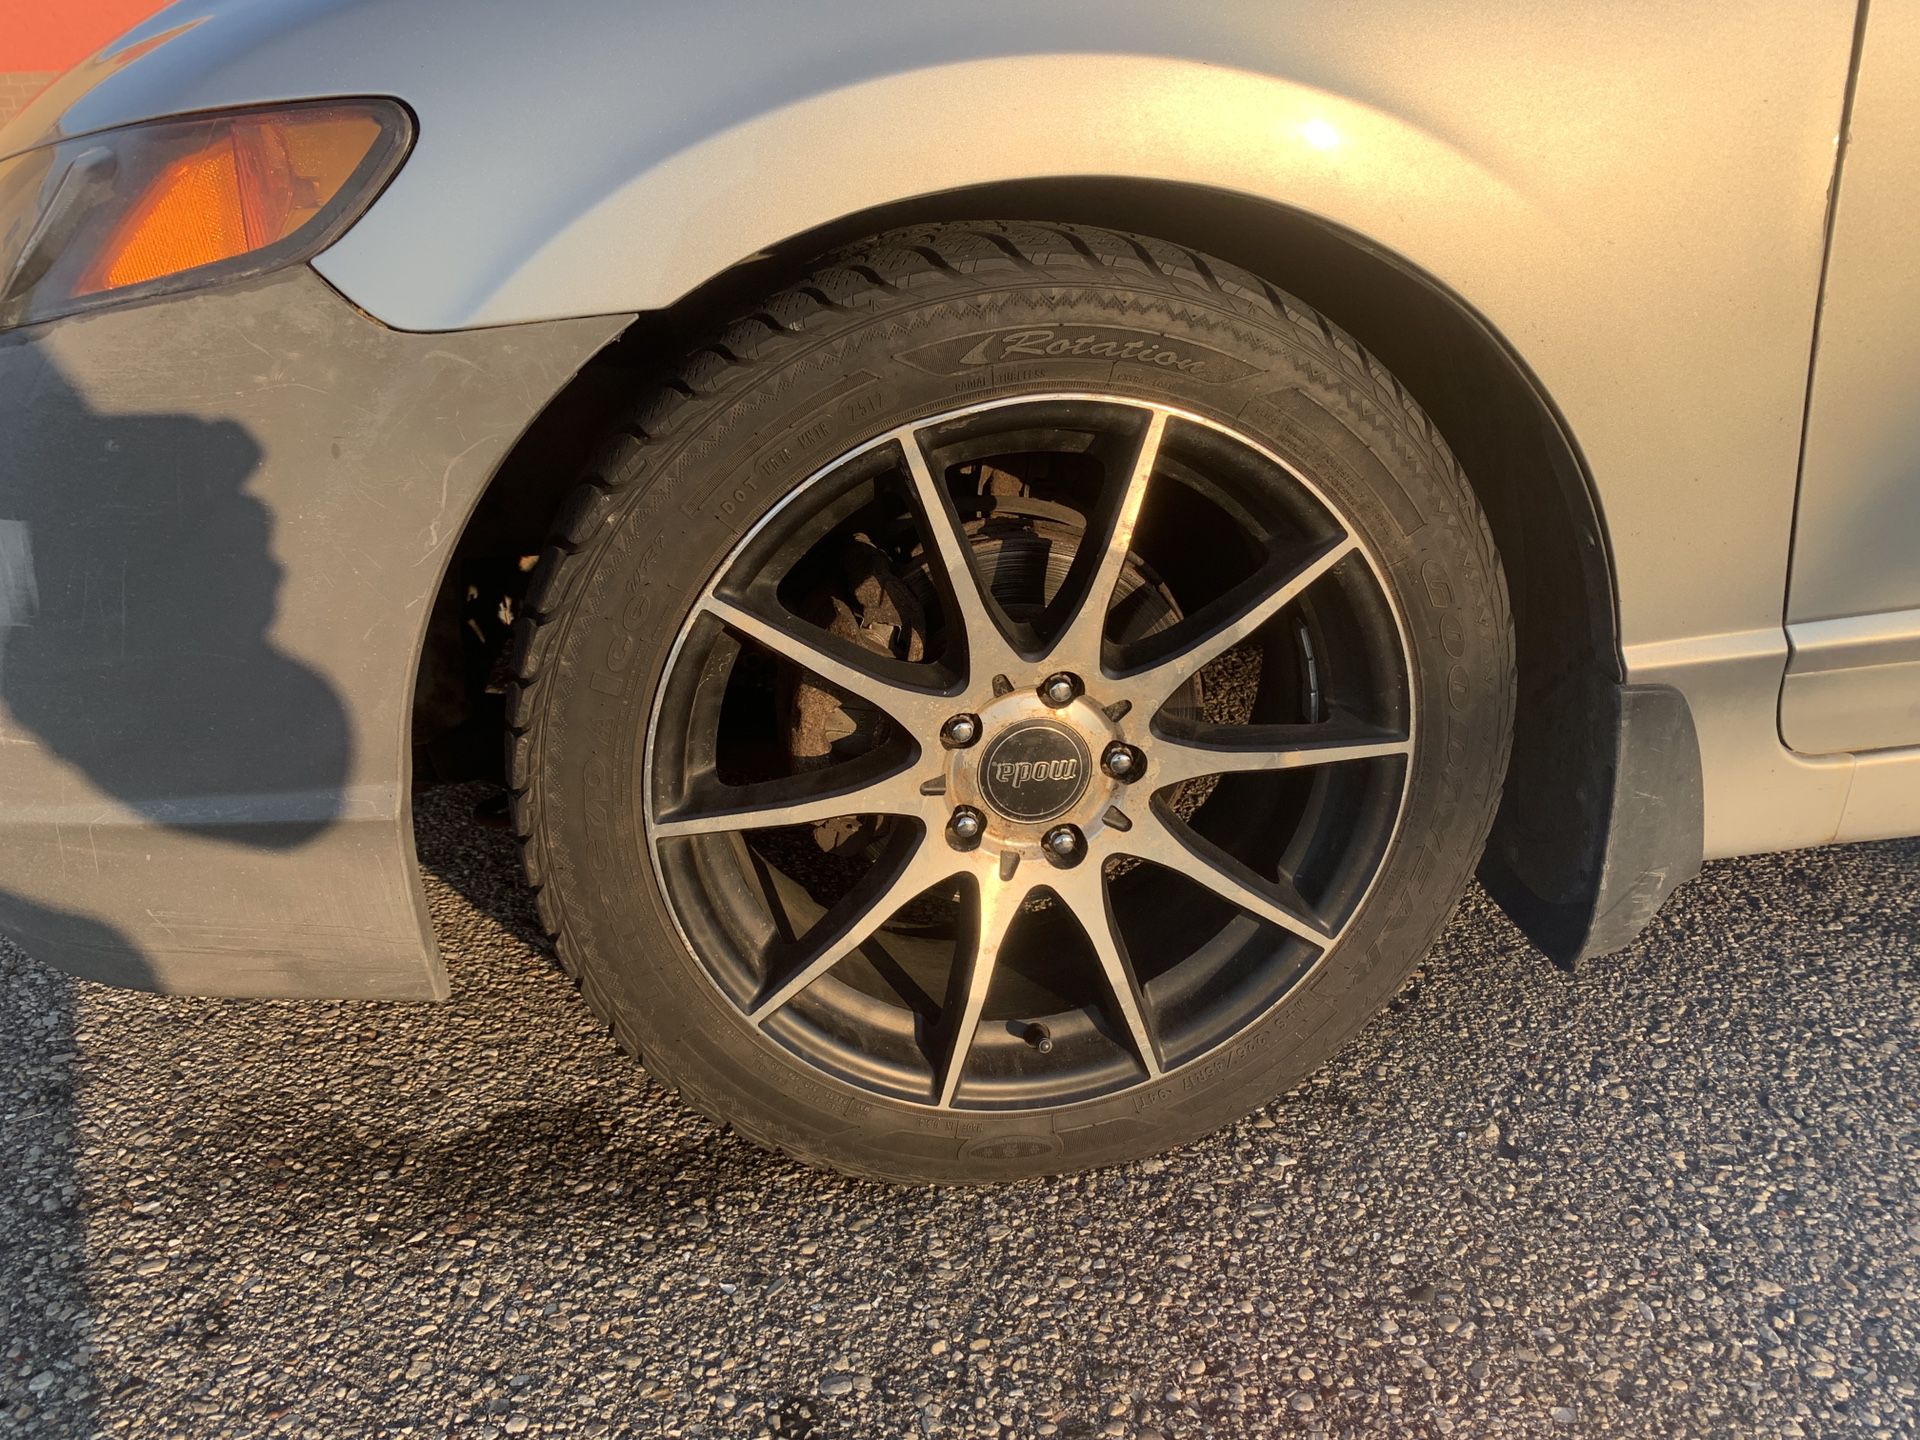 Set of rims with tires - theft proof lug nuts(READ)